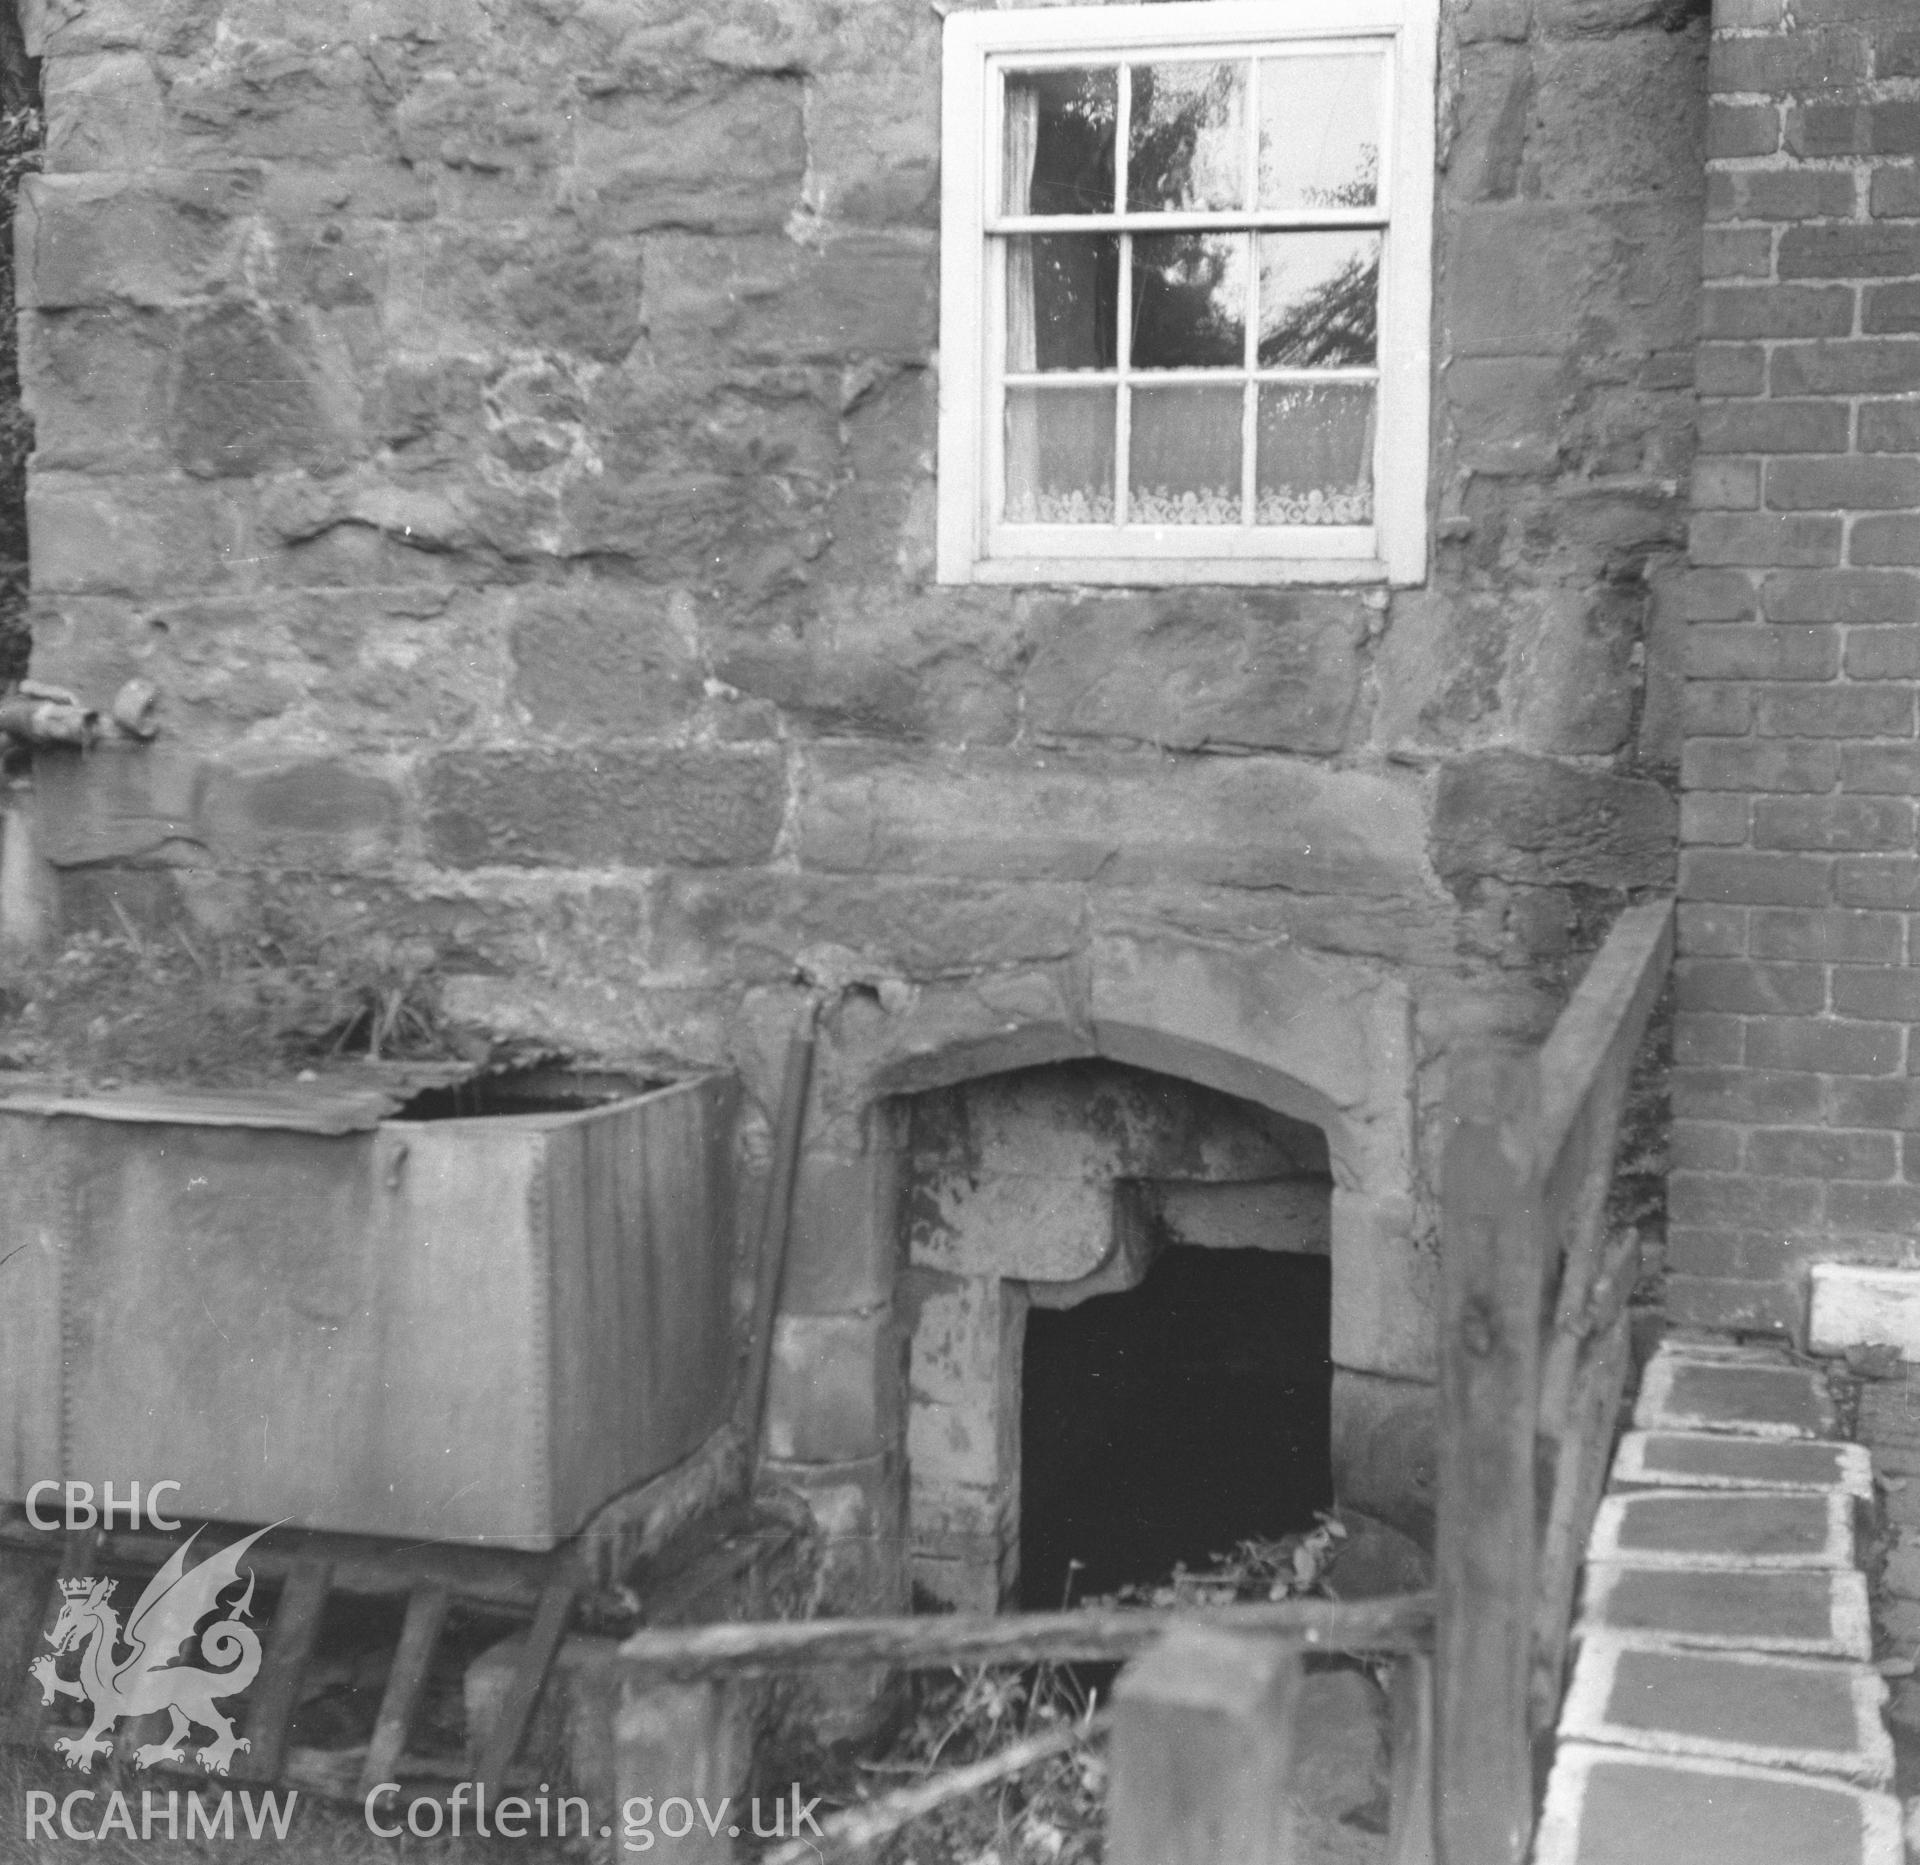 Digital copy of a black and white nitrate negative showing detail of doorway at Llyseurgain.